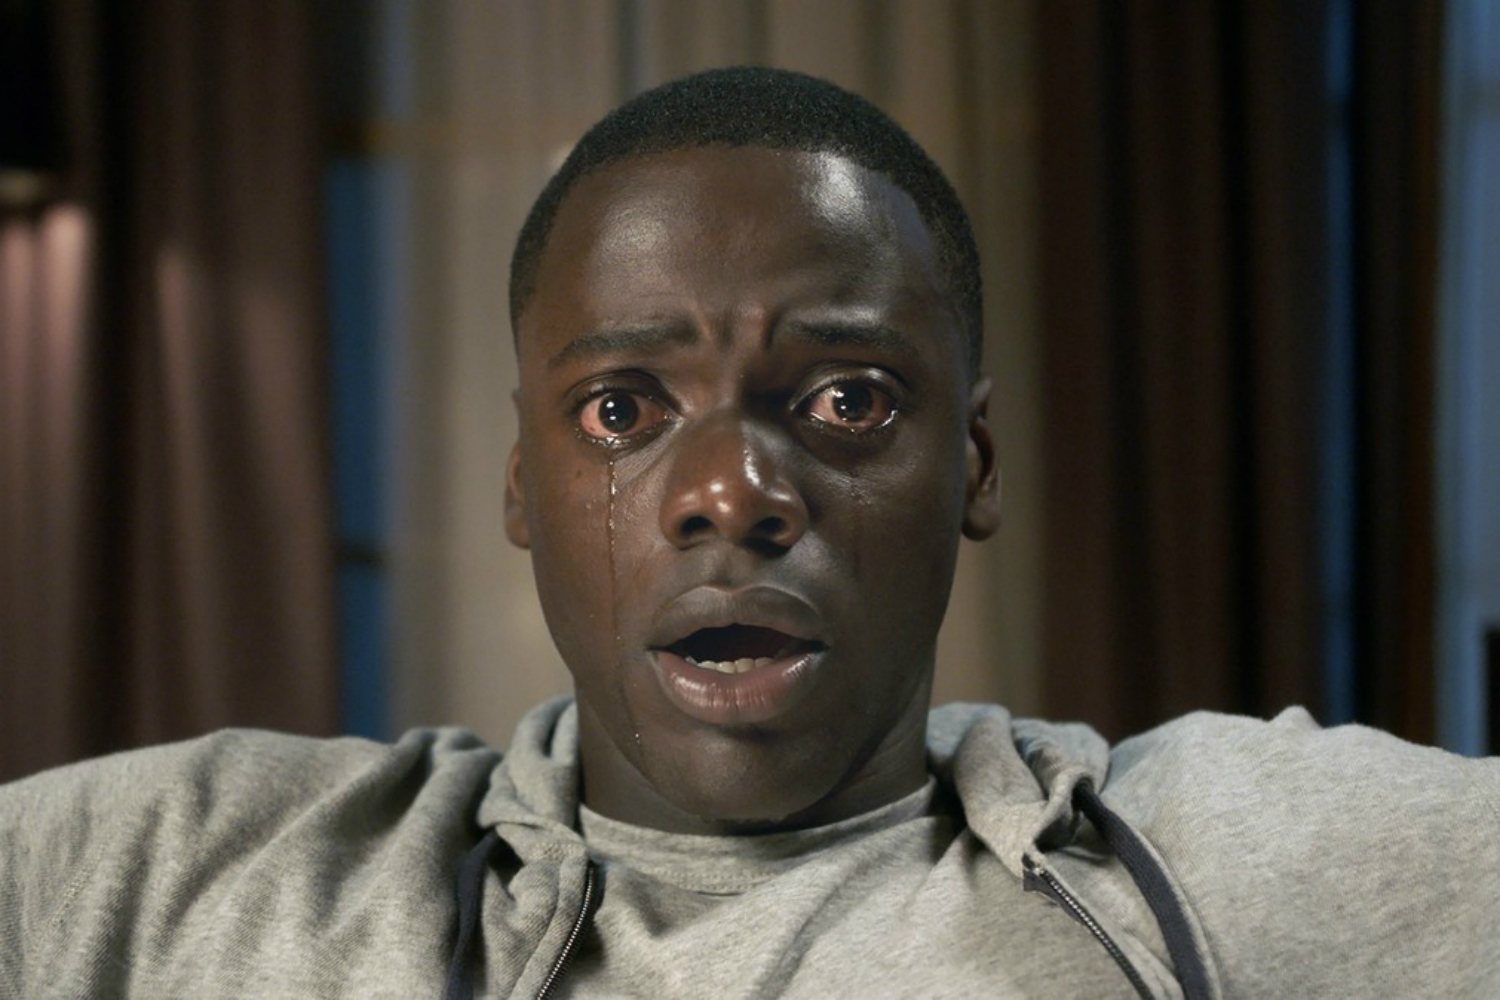 Chris crying in "Get Out."